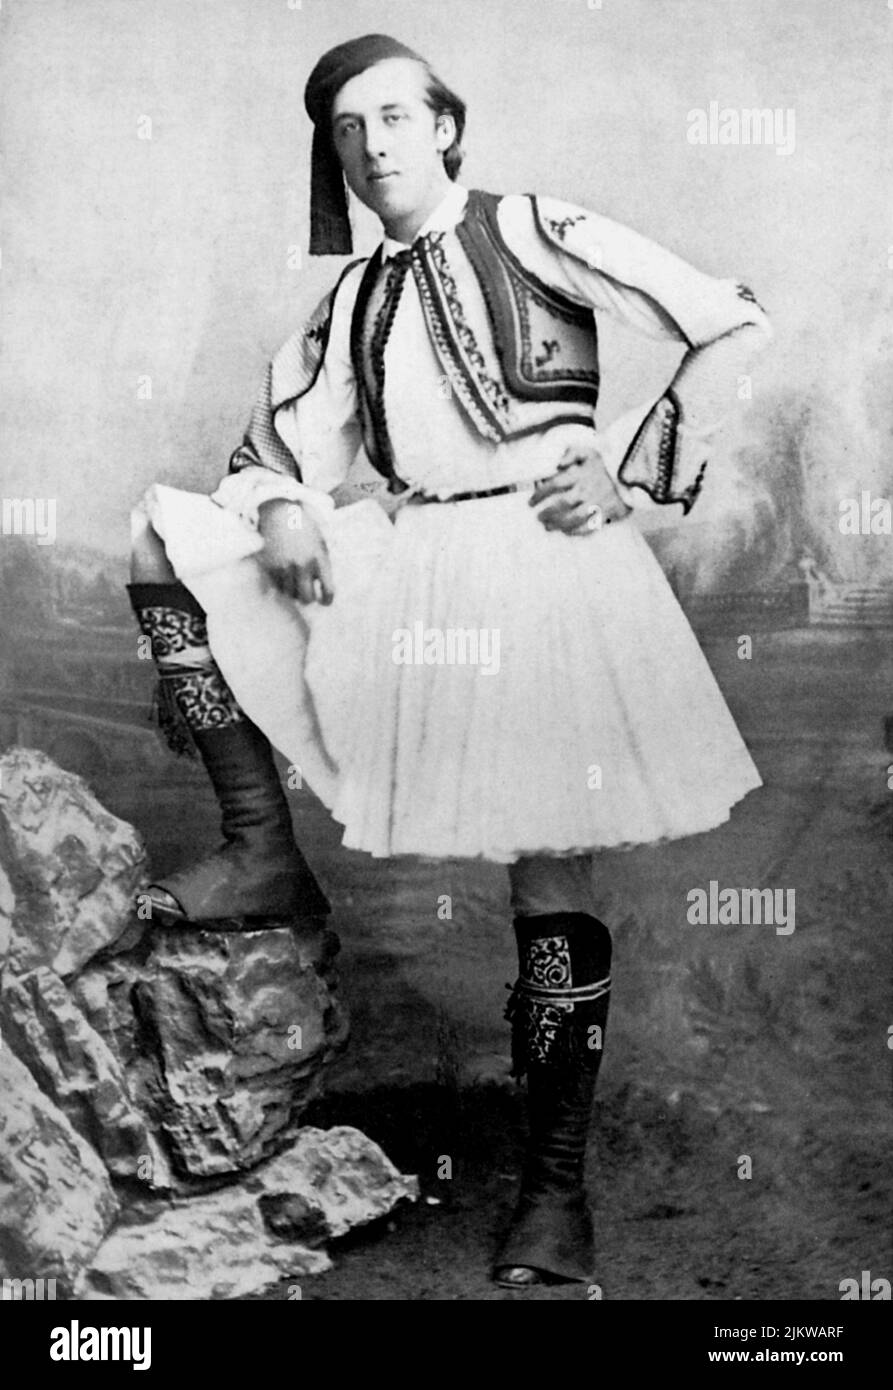 1877 , april , Athens , Greece   : The irish writer and dramatist OSCAR WILDE ( 1854 - 1900 ) dressed with Greek national costume during his trip to Greece with Mahaffy  - SCRITTORE - LETTERATURA - LITERATURE - POET - POETA - POESIA - DRAMMATURGO - playwriter - play-writer - TEATRO - THEATER - POETRY  - DANDY - GAY - HOMOSEXUALITY - HOMOSEXUAL - omosessuale - omosessualità  ----  Archivio GBB Stock Photo